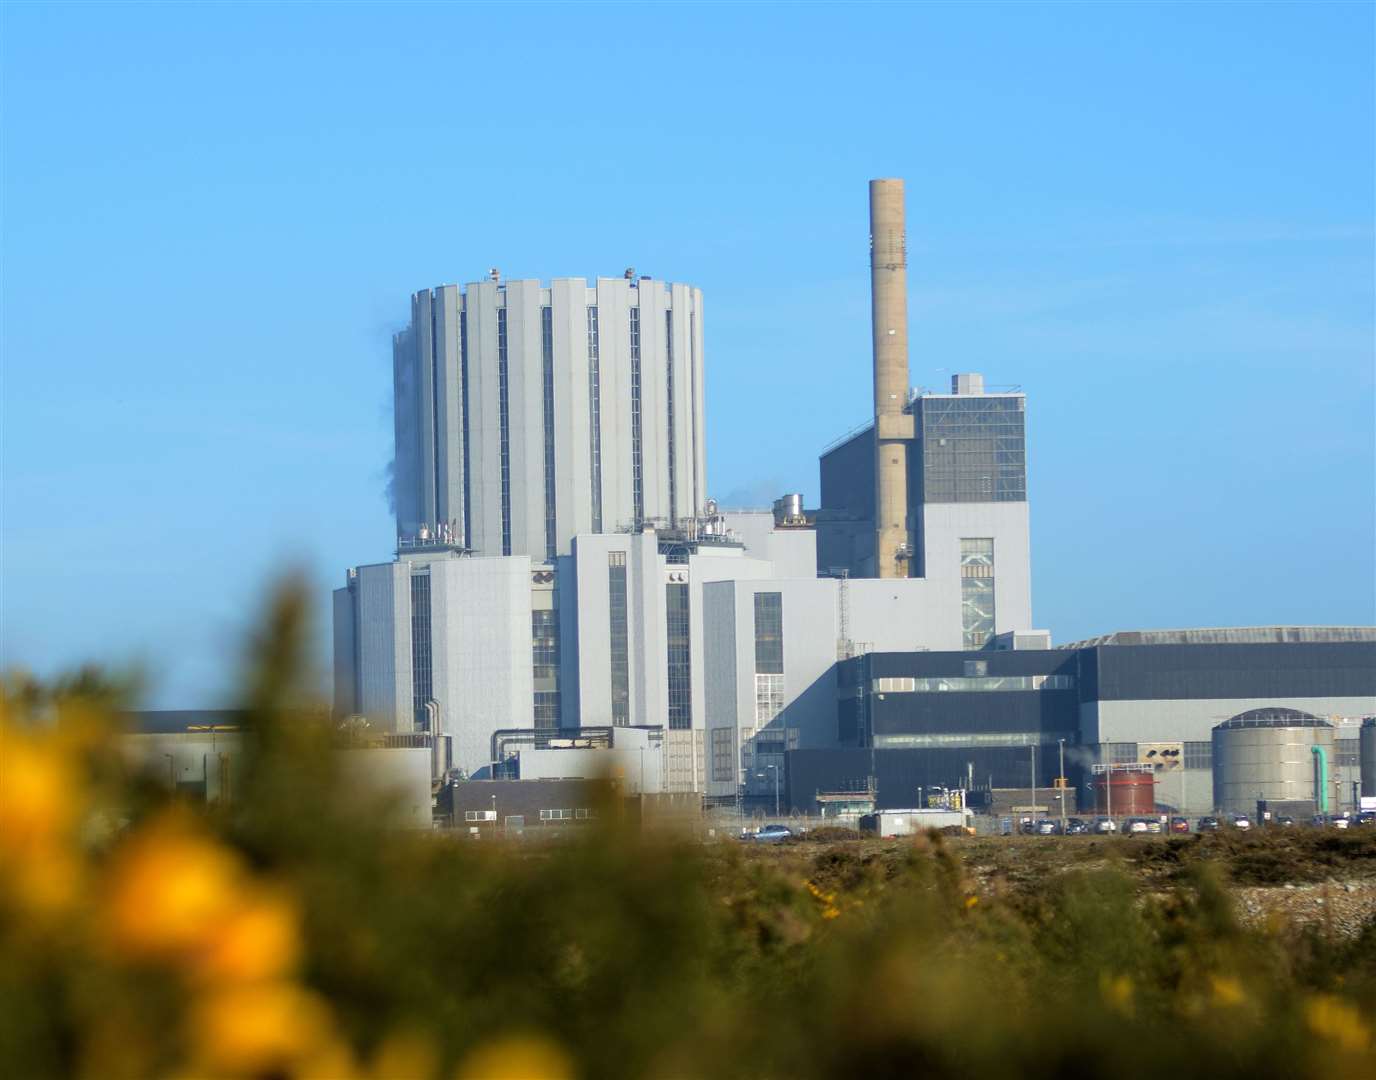 Dungeness B nuclear power station has been offline since 2018